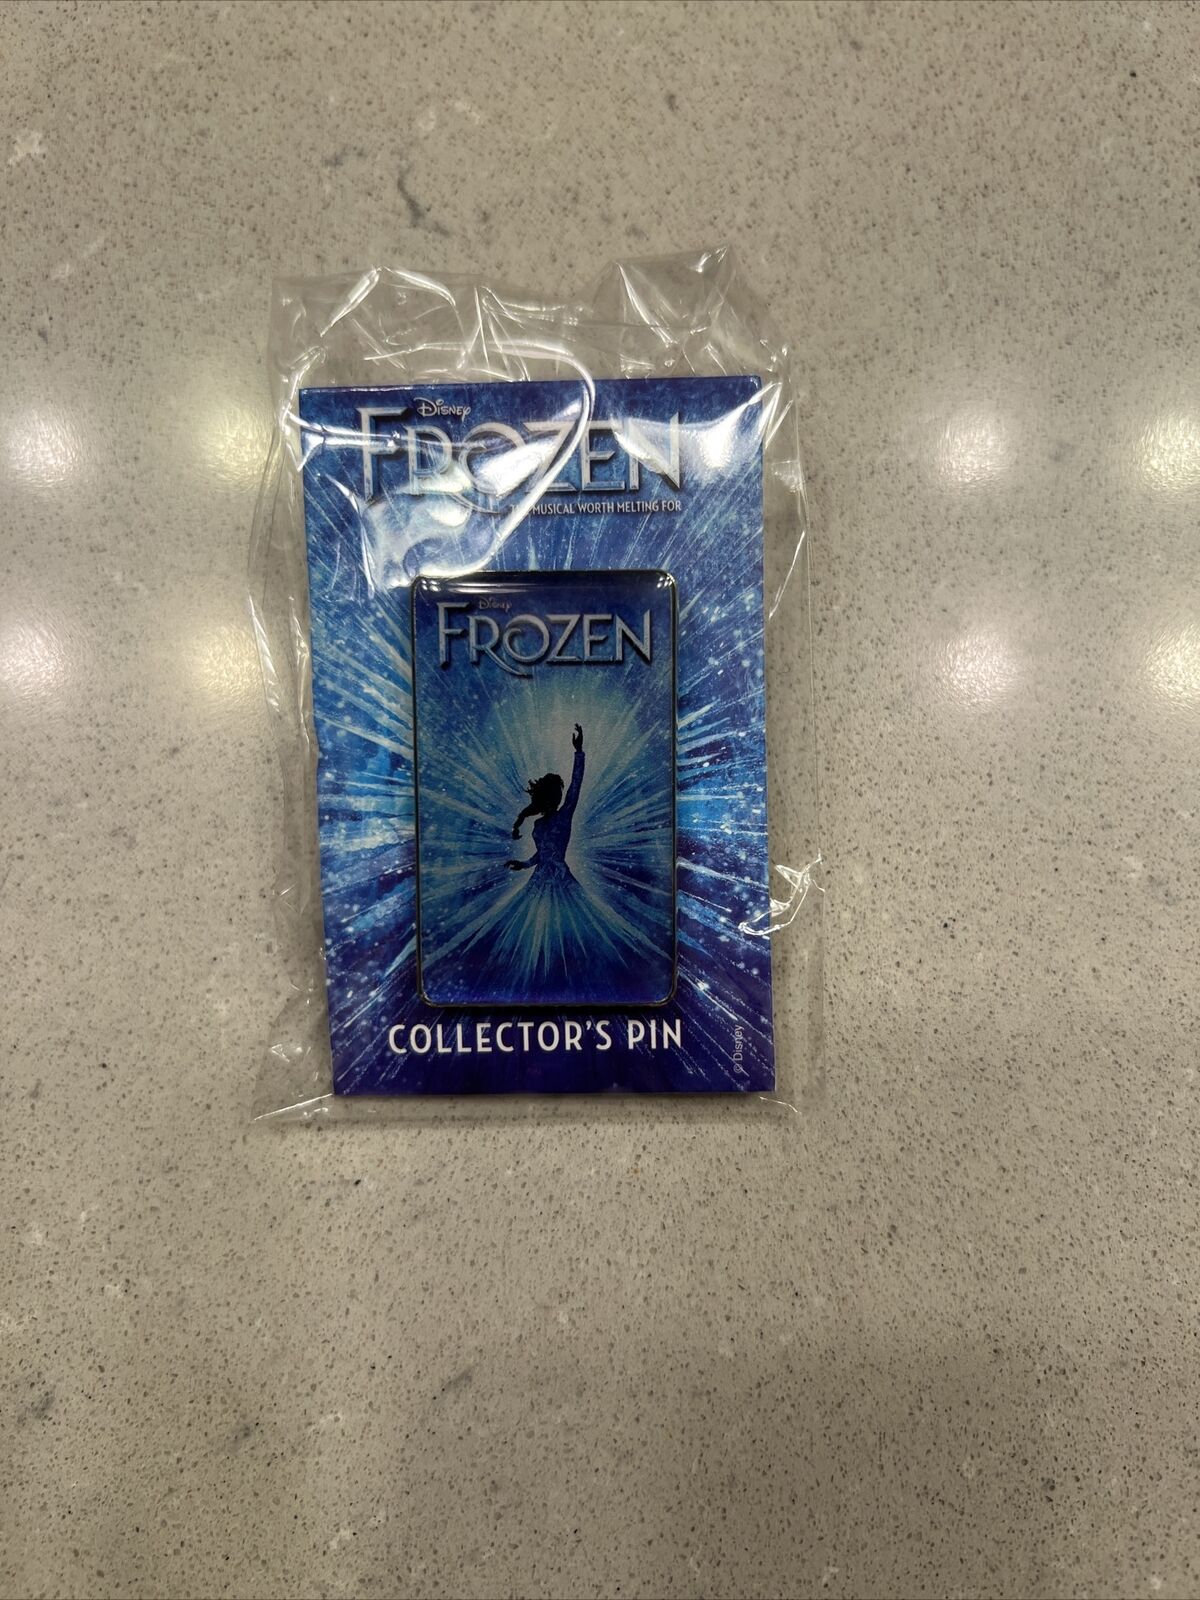 Disney Frozen The Broadway Musical - Collector’s Pin